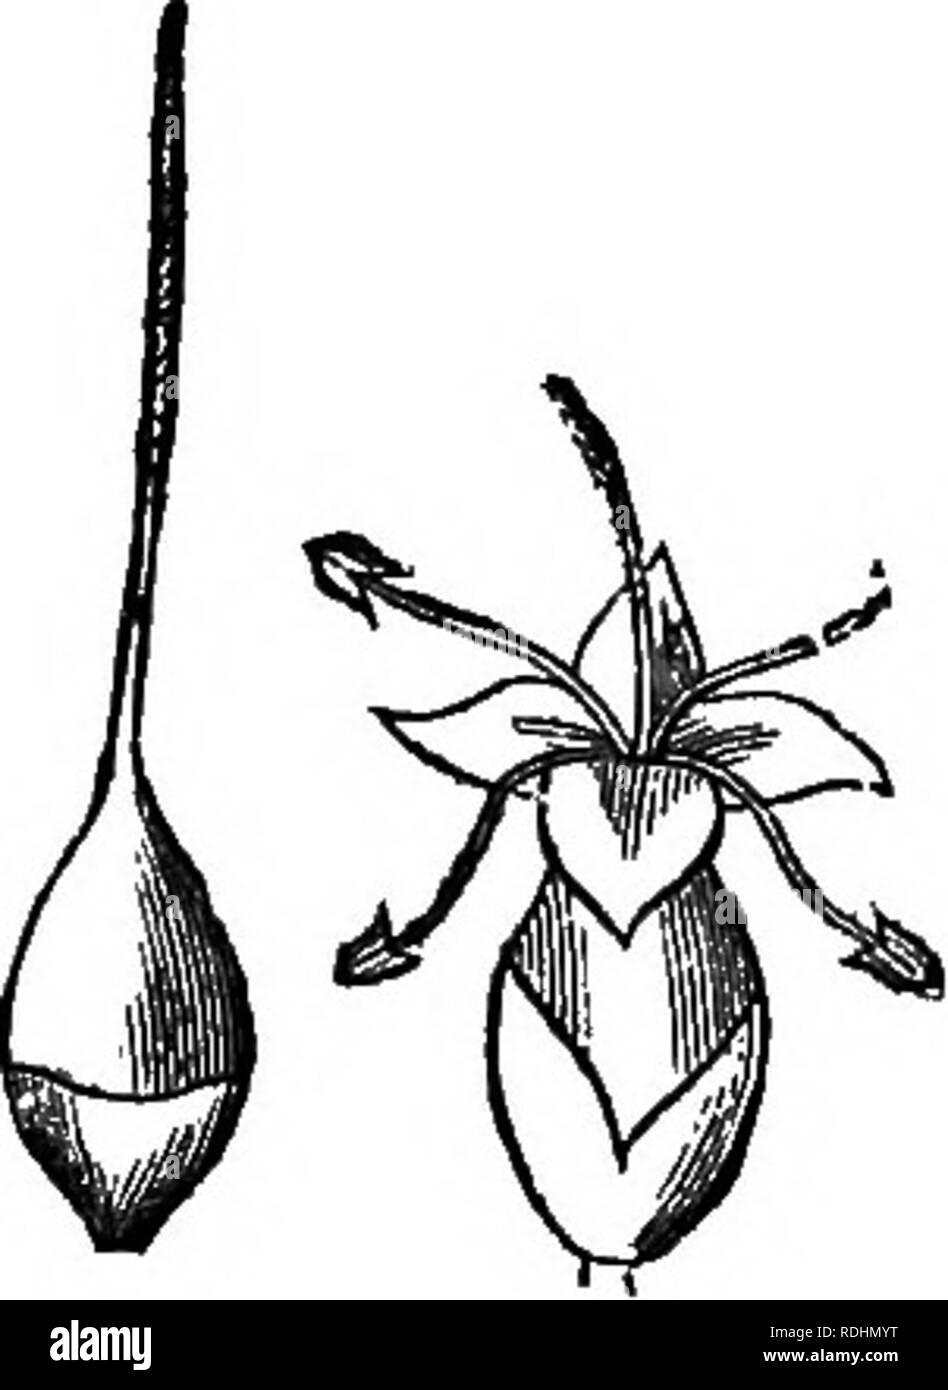 . Botany for young people and common schools : how plants grow, a simple introduction to structural botany : with a popular flora, or an arrangement and description of common plants both wild and cultivated : illustrated by 500 wood engravings . Botany. 56. PLANTAIN FAMILY. Order PLANTAGINACE.ffi. Consists mainly of the genus of low stemless herbs called Plantain (or Rib-Grass). PlarU&amp;go. Flowers greenish, on a scape, in a close spike. *â Calyx of 4 persistent sepals. Corolla salver-shaped, thin, withering on the pod, 4-lobed. Stamens 4, generally with very long and weak filaments, borne o Stock Photo